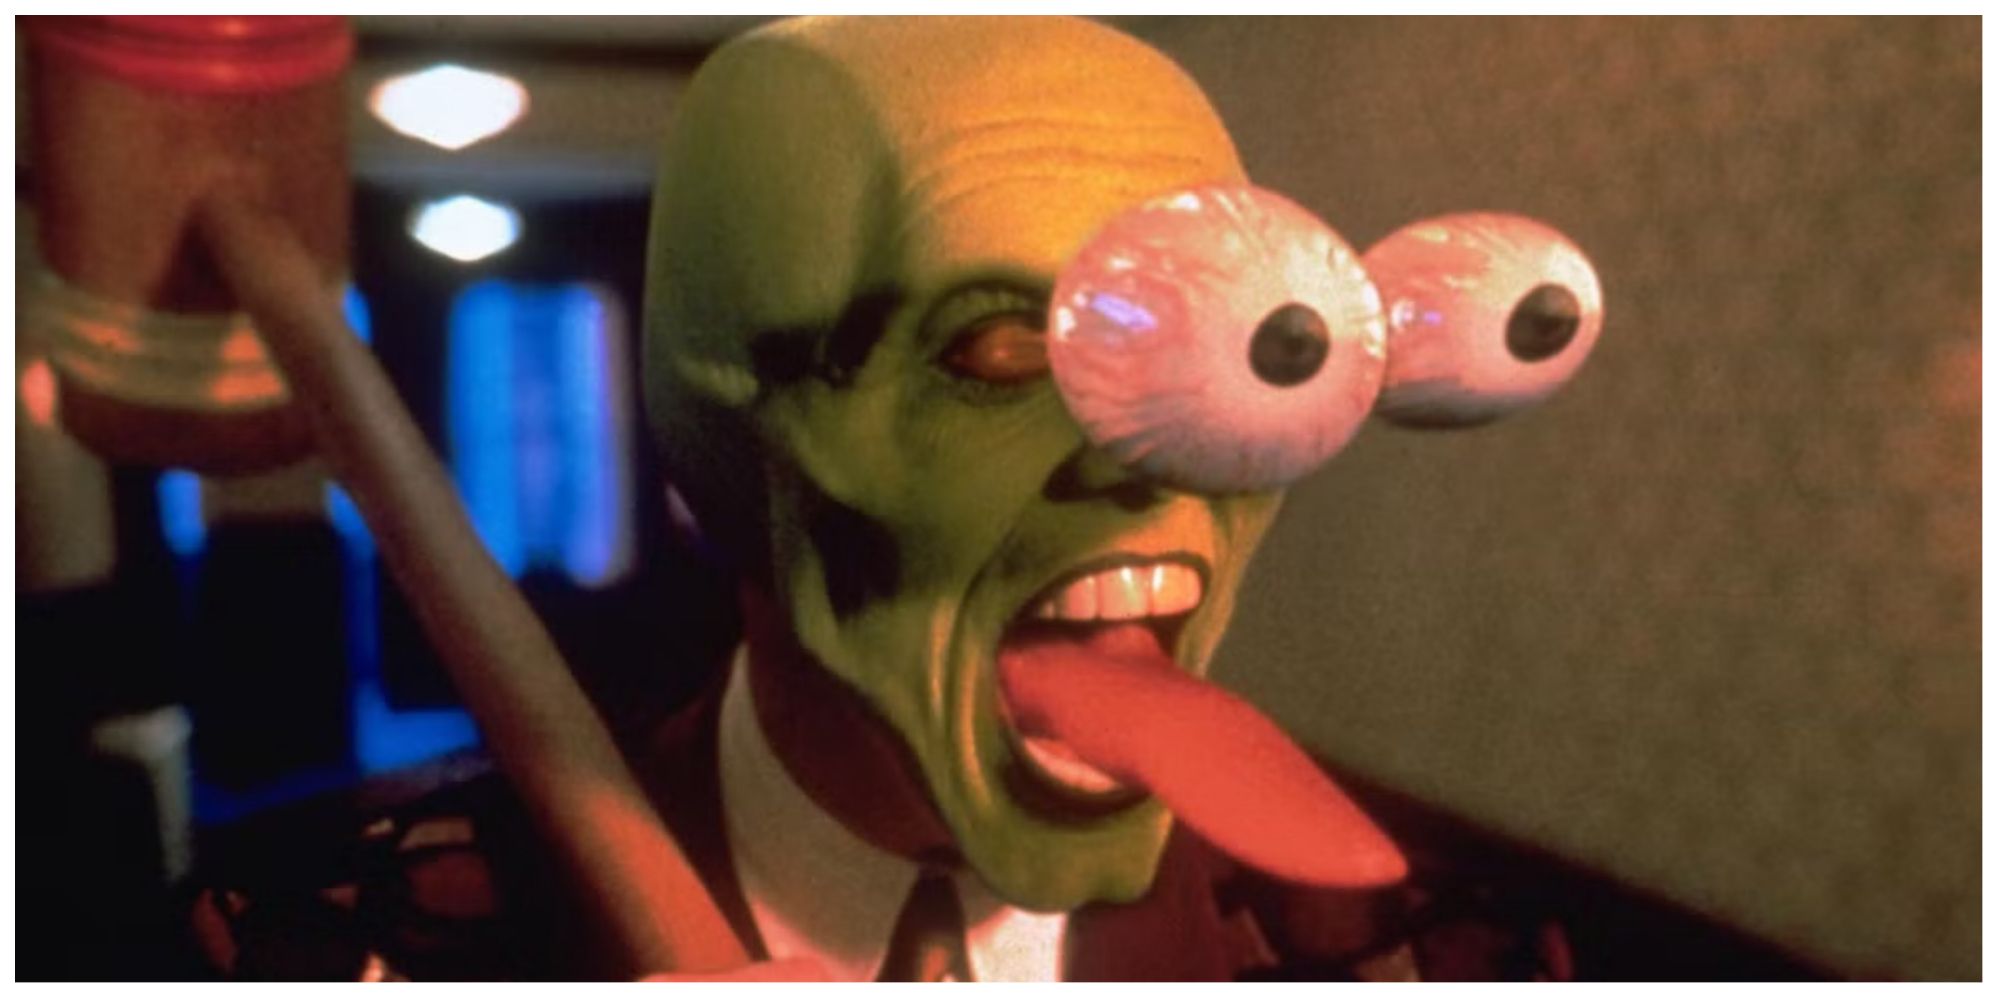 The Mask With Stanley Ipkiss as Jim Carey (1994)